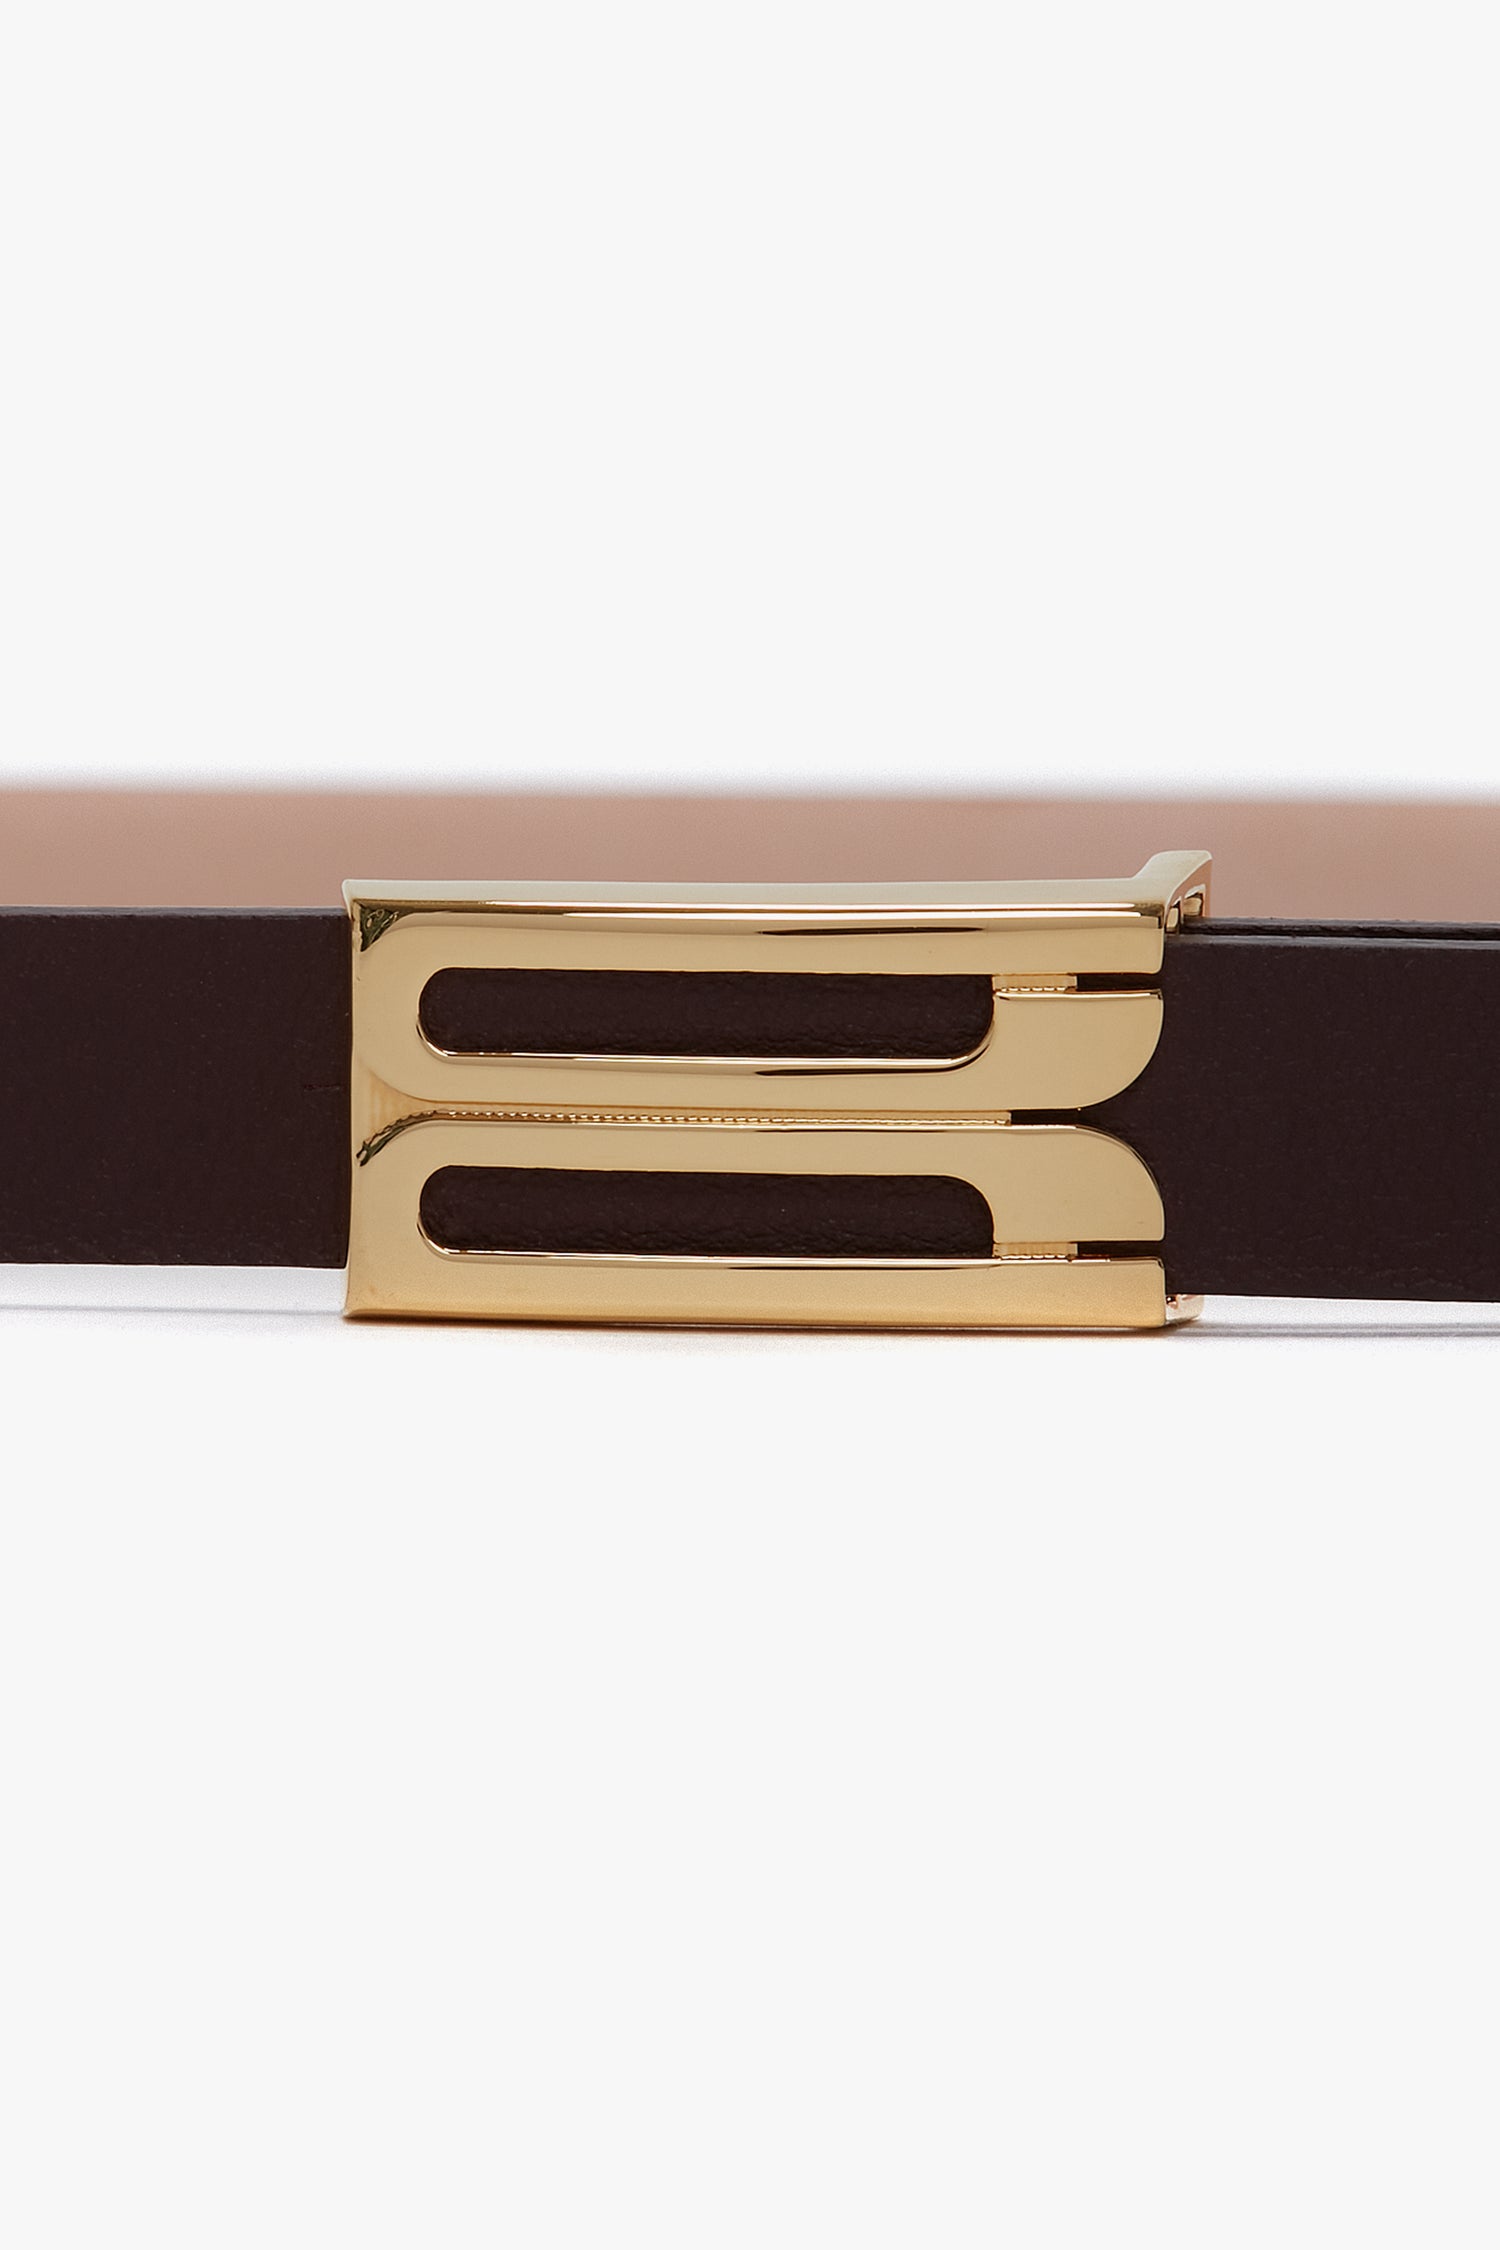 A close-up image of the Victoria Beckham Frame Belt In Burgundy Leather, featuring a gold buckle with modern, rectangular design and luxurious gold hardware accents.